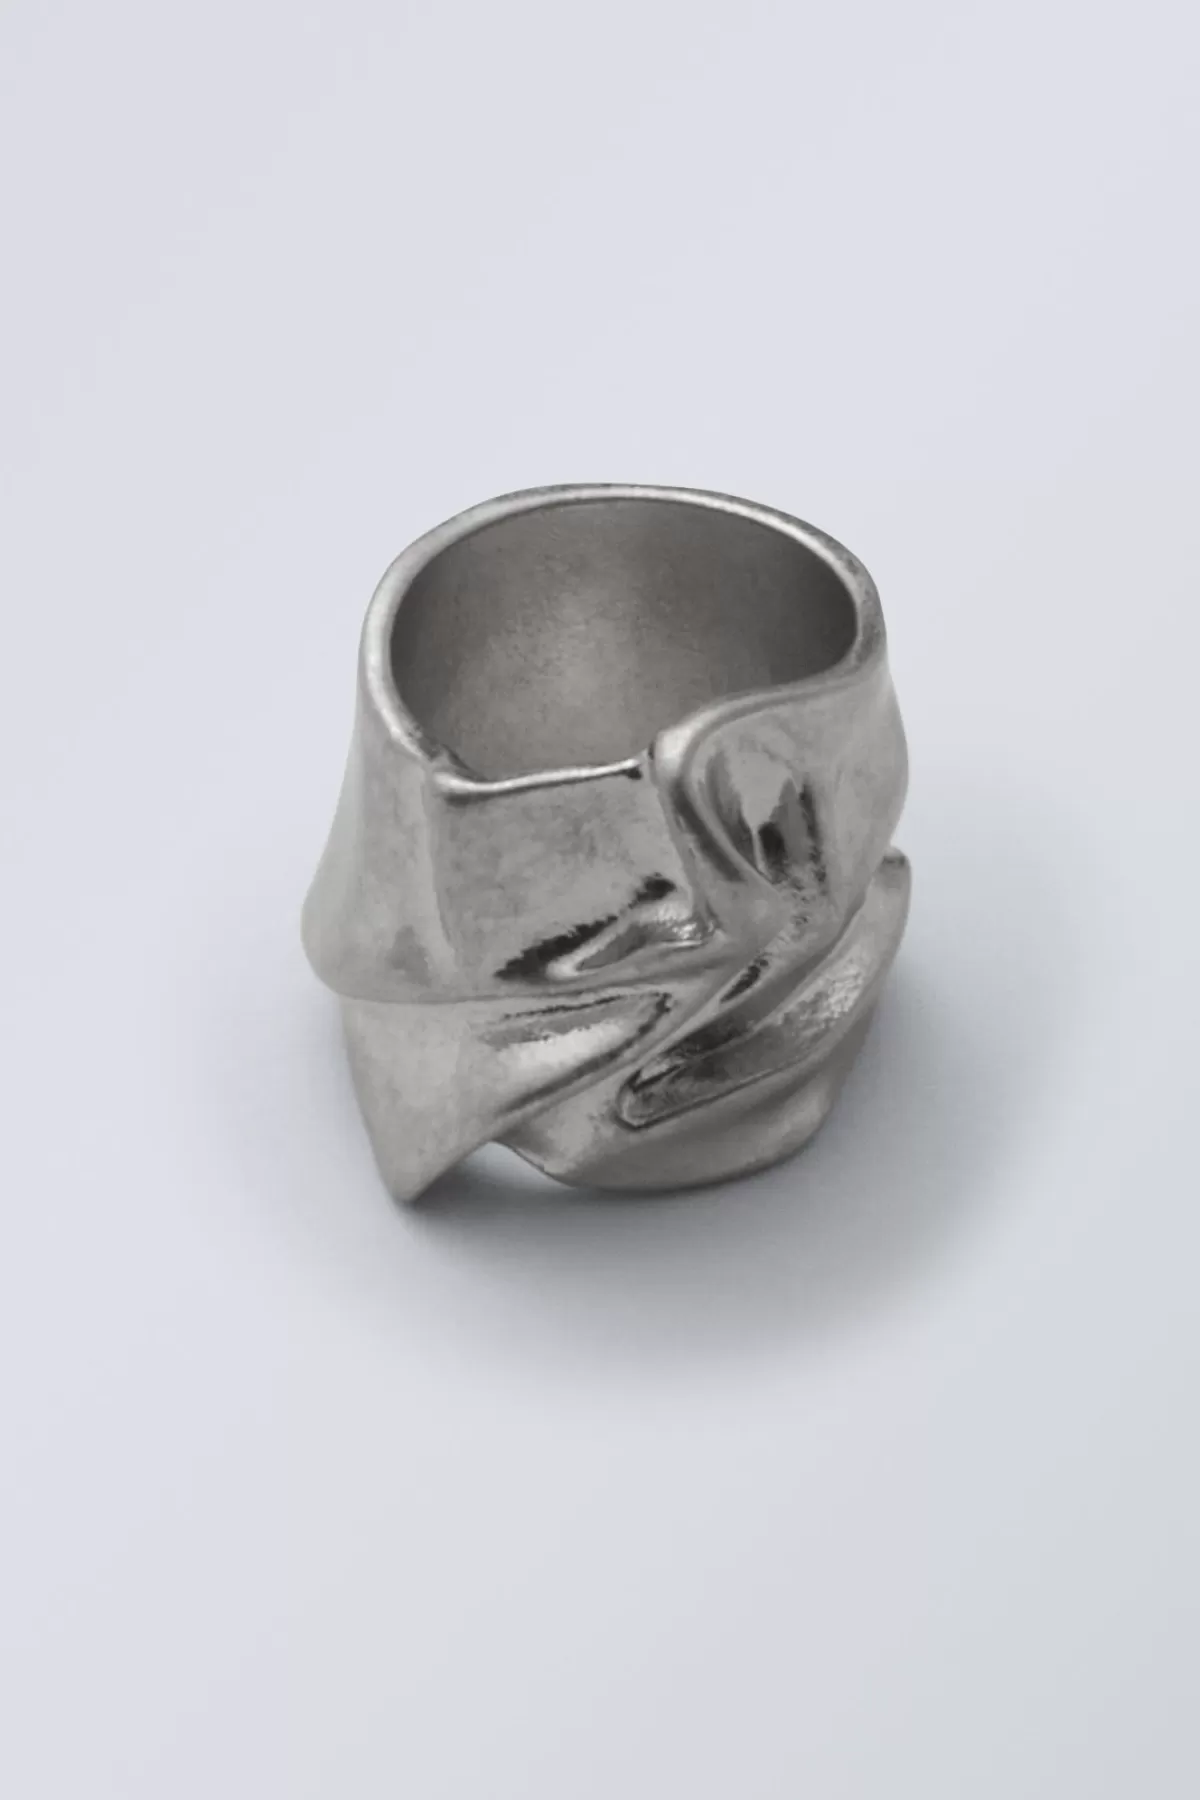 Weekday Ivy Crinkled Ring Silver New